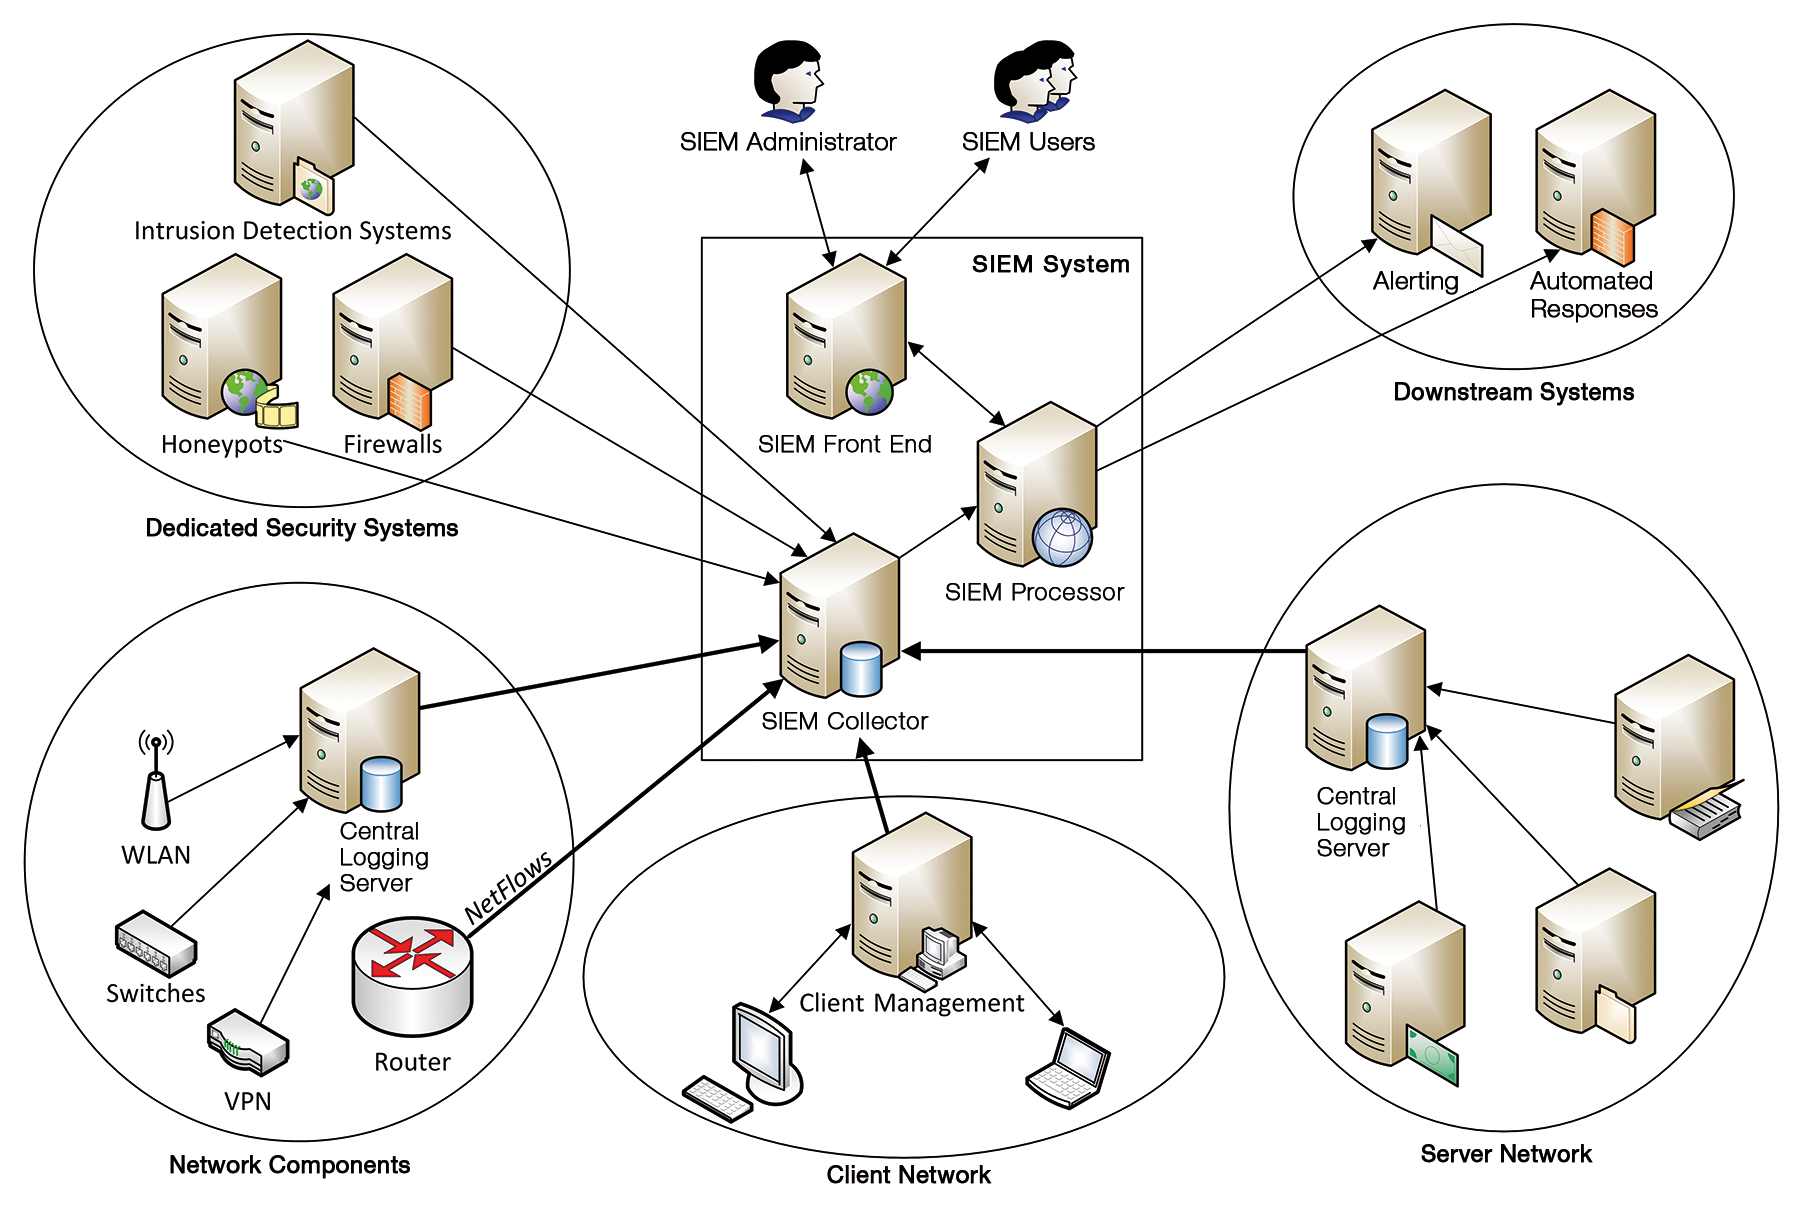 Architecture of a SIEM system with data sources and downstream systems. 